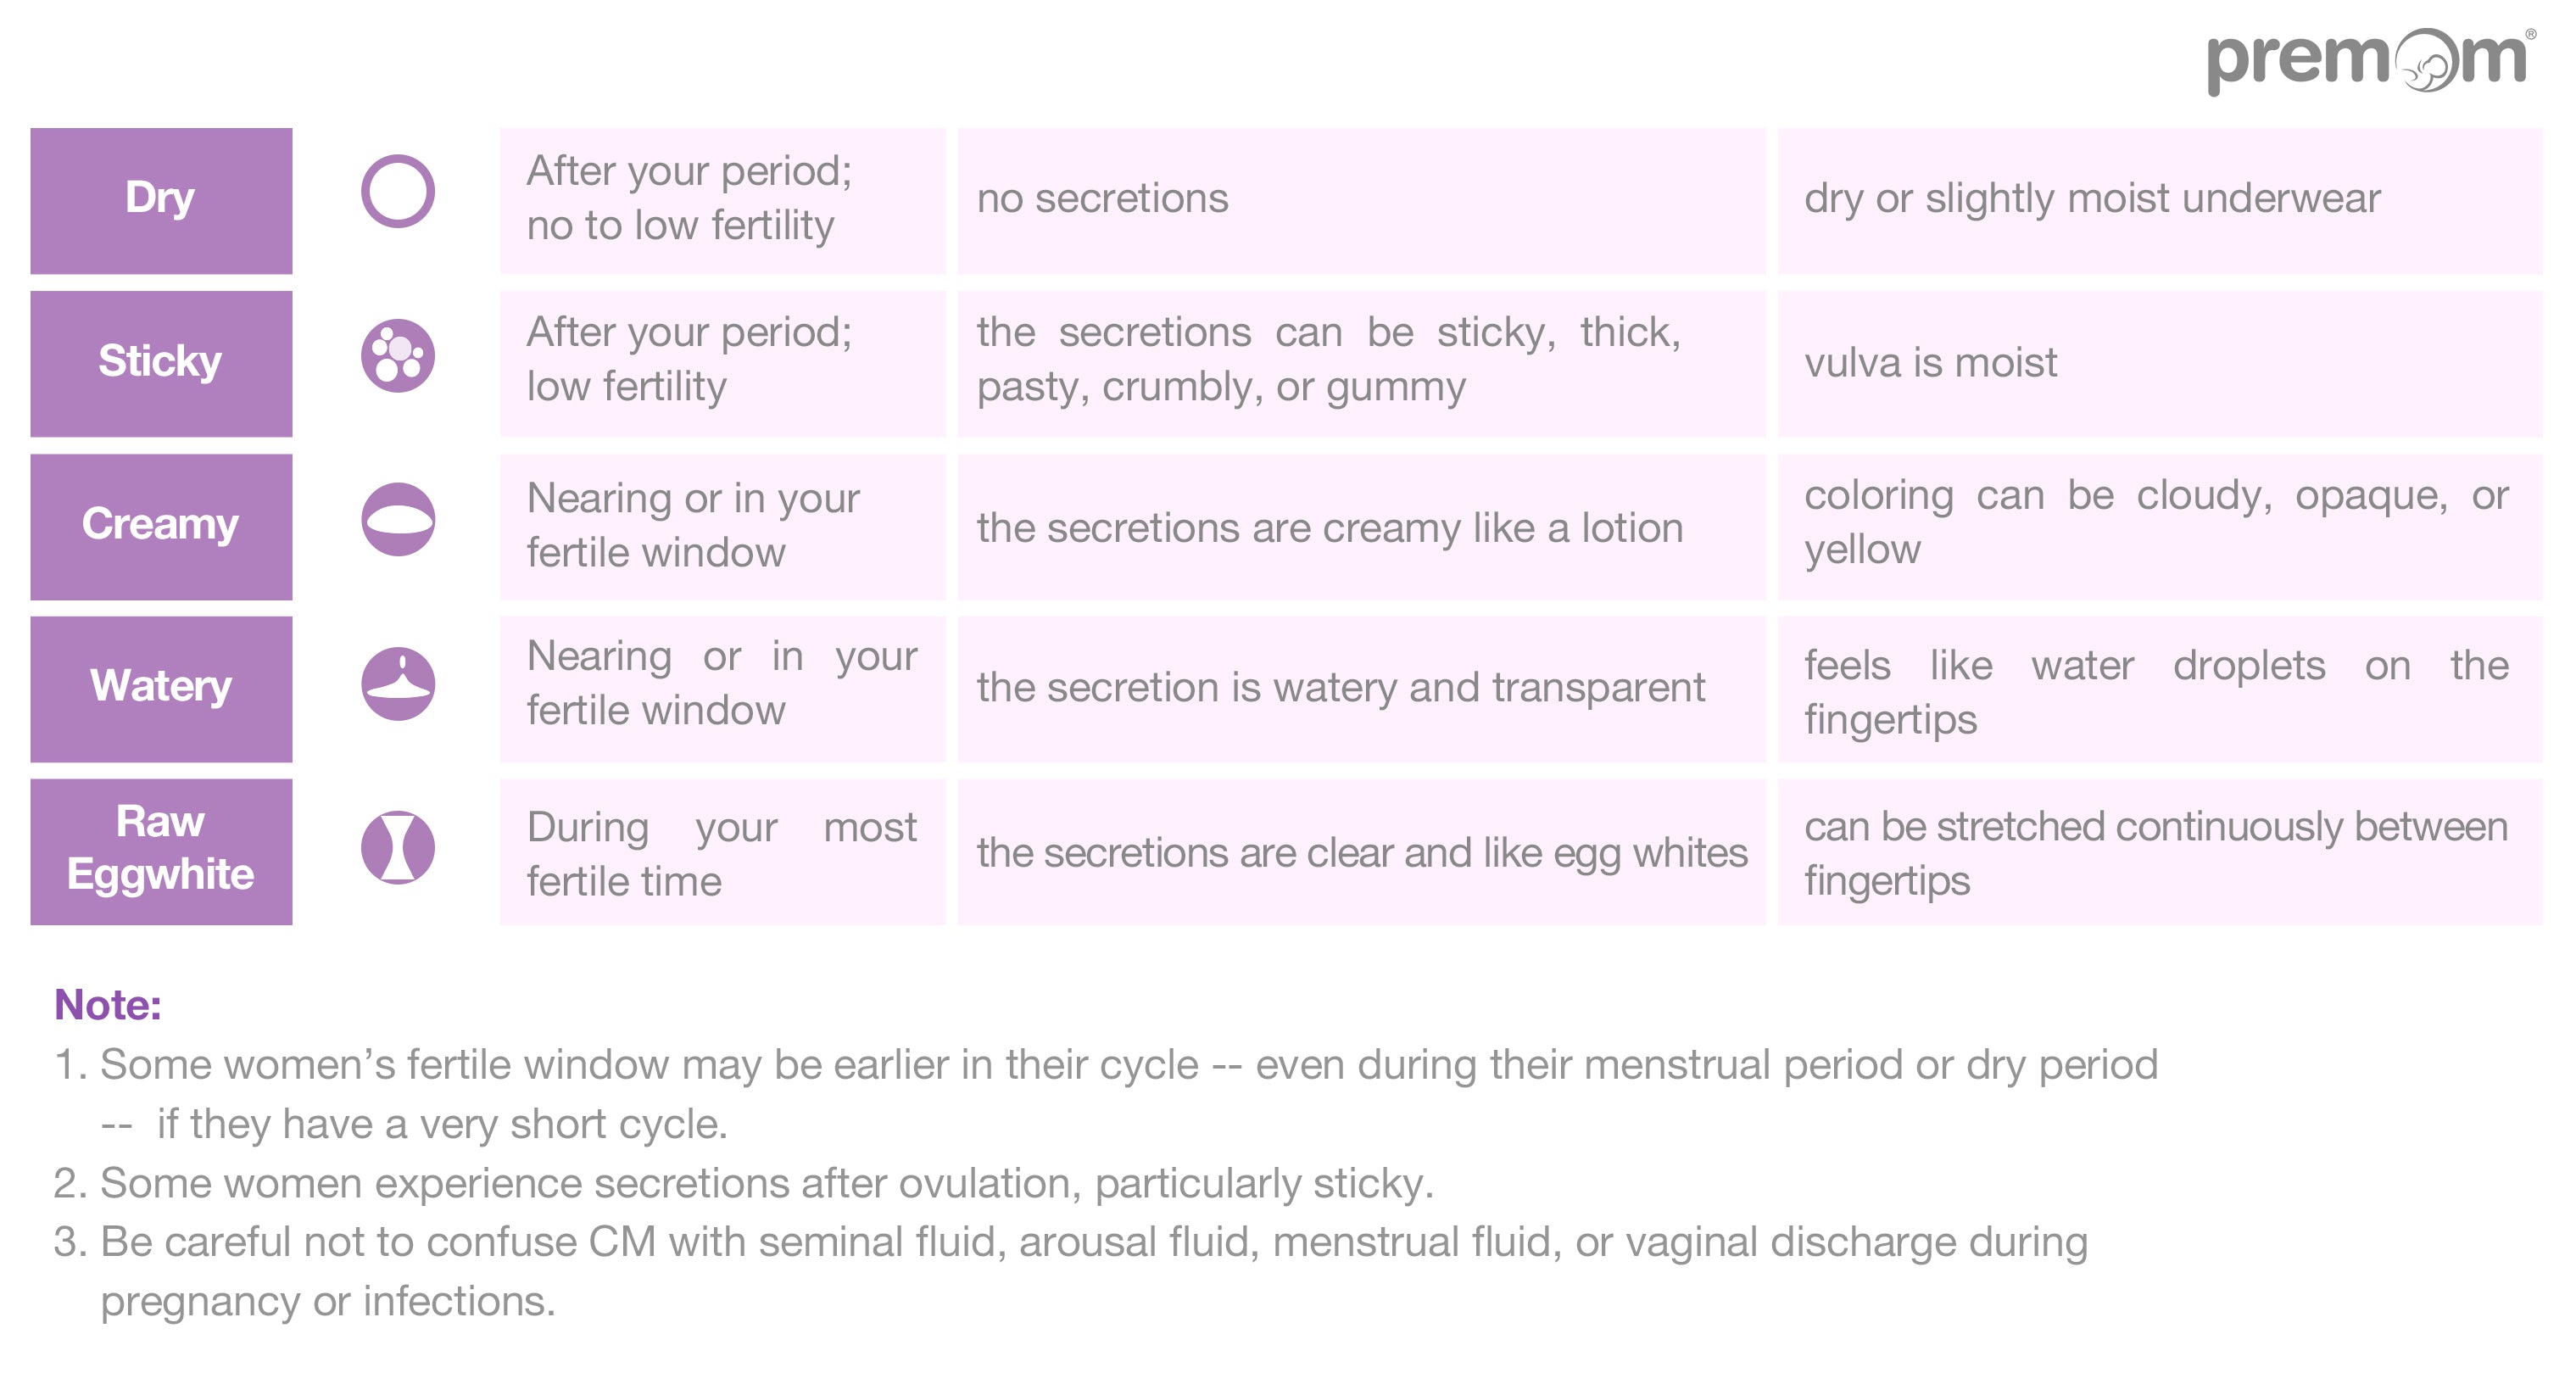 Cervical Mucus Ovulation Chart